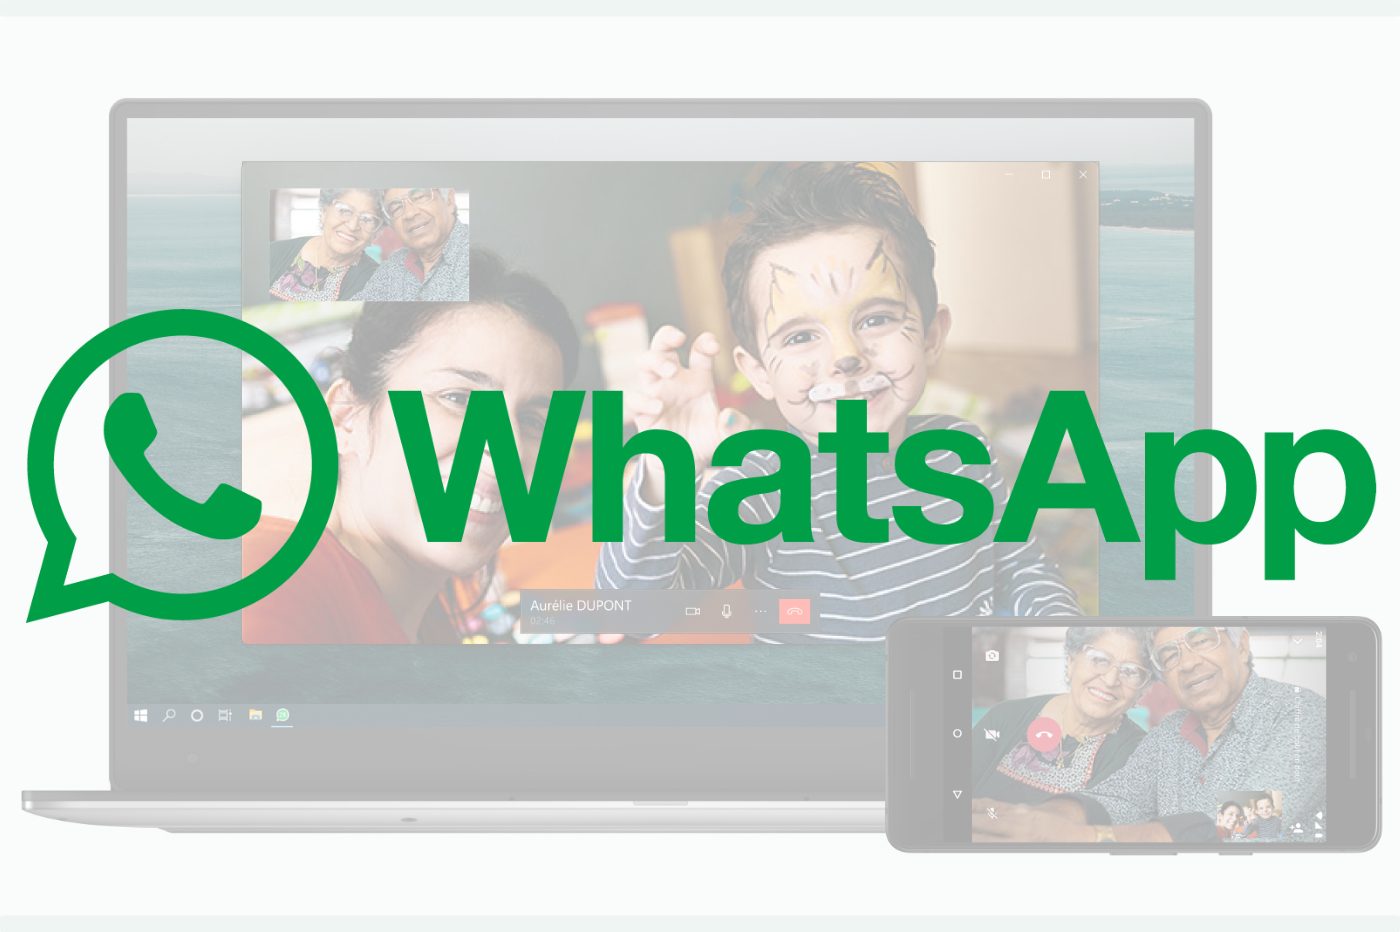 30 whatsapp tips and hidden features to master on iphone and android